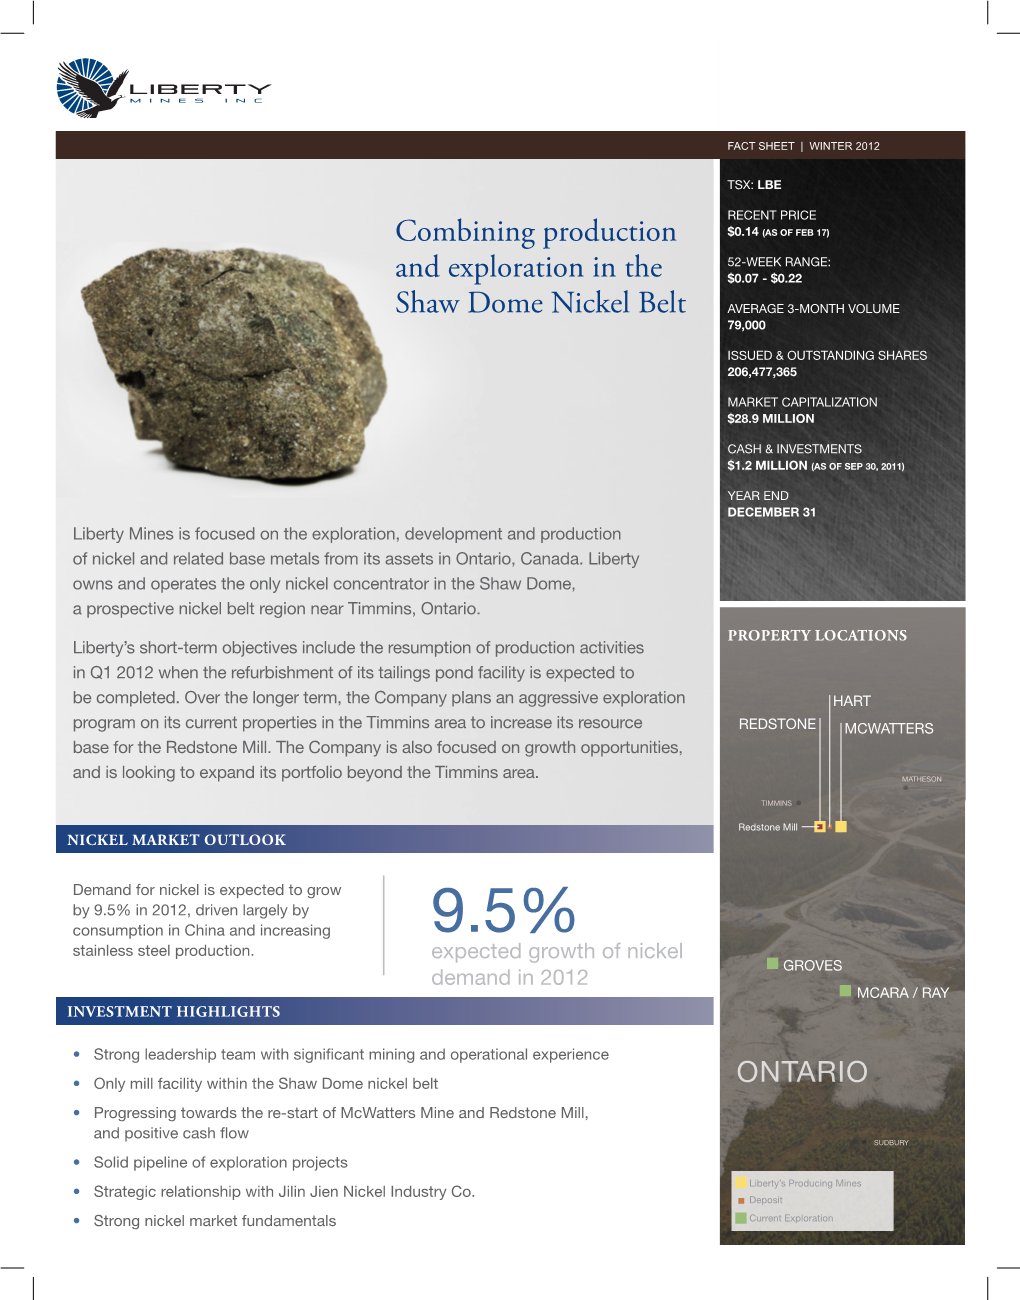 Combining Production and Exploration in the Shaw Dome Nickel Belt